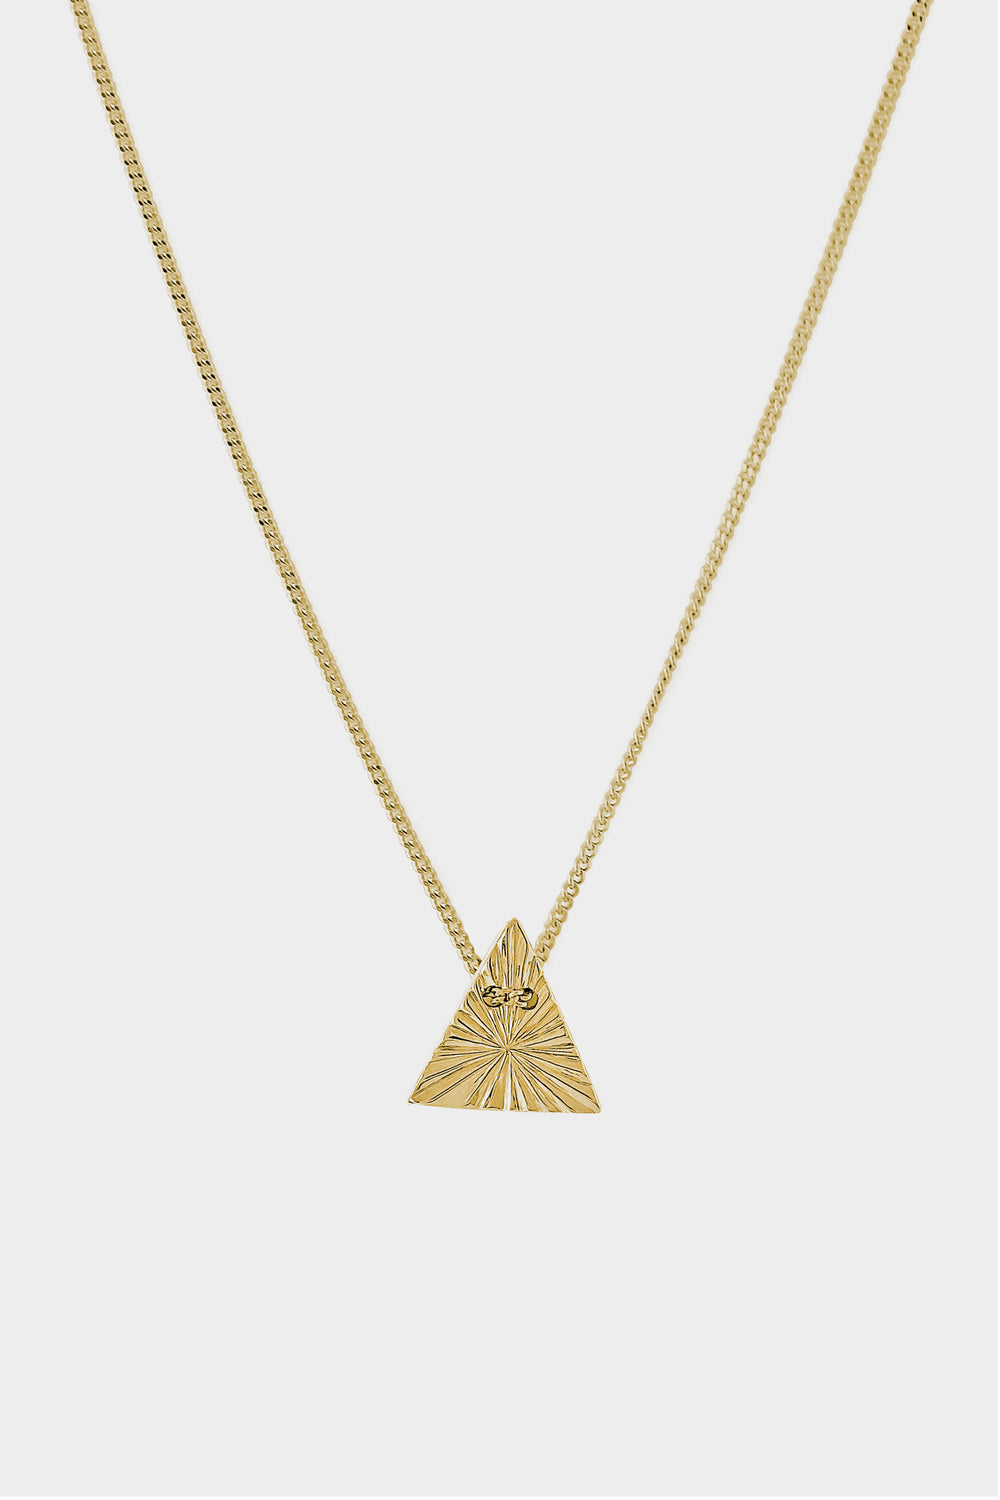 Aether Element Necklace | 9K Gold